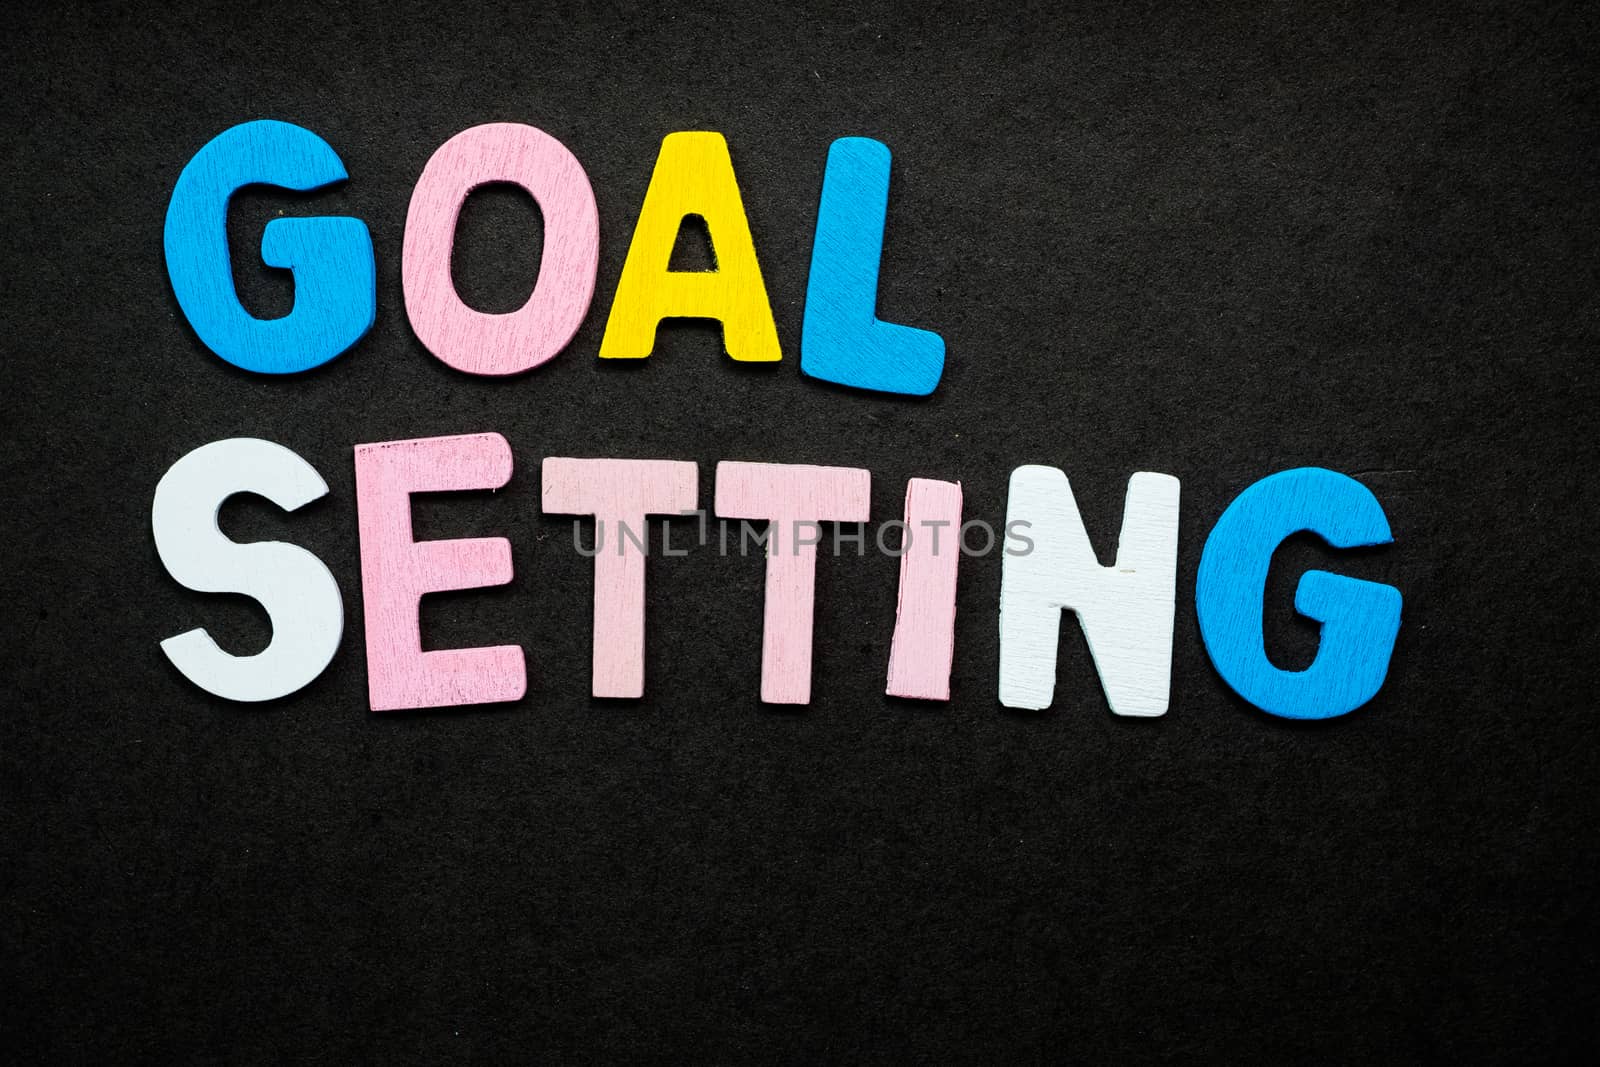 Colorful wooden letters forming the phrase "goal setting"